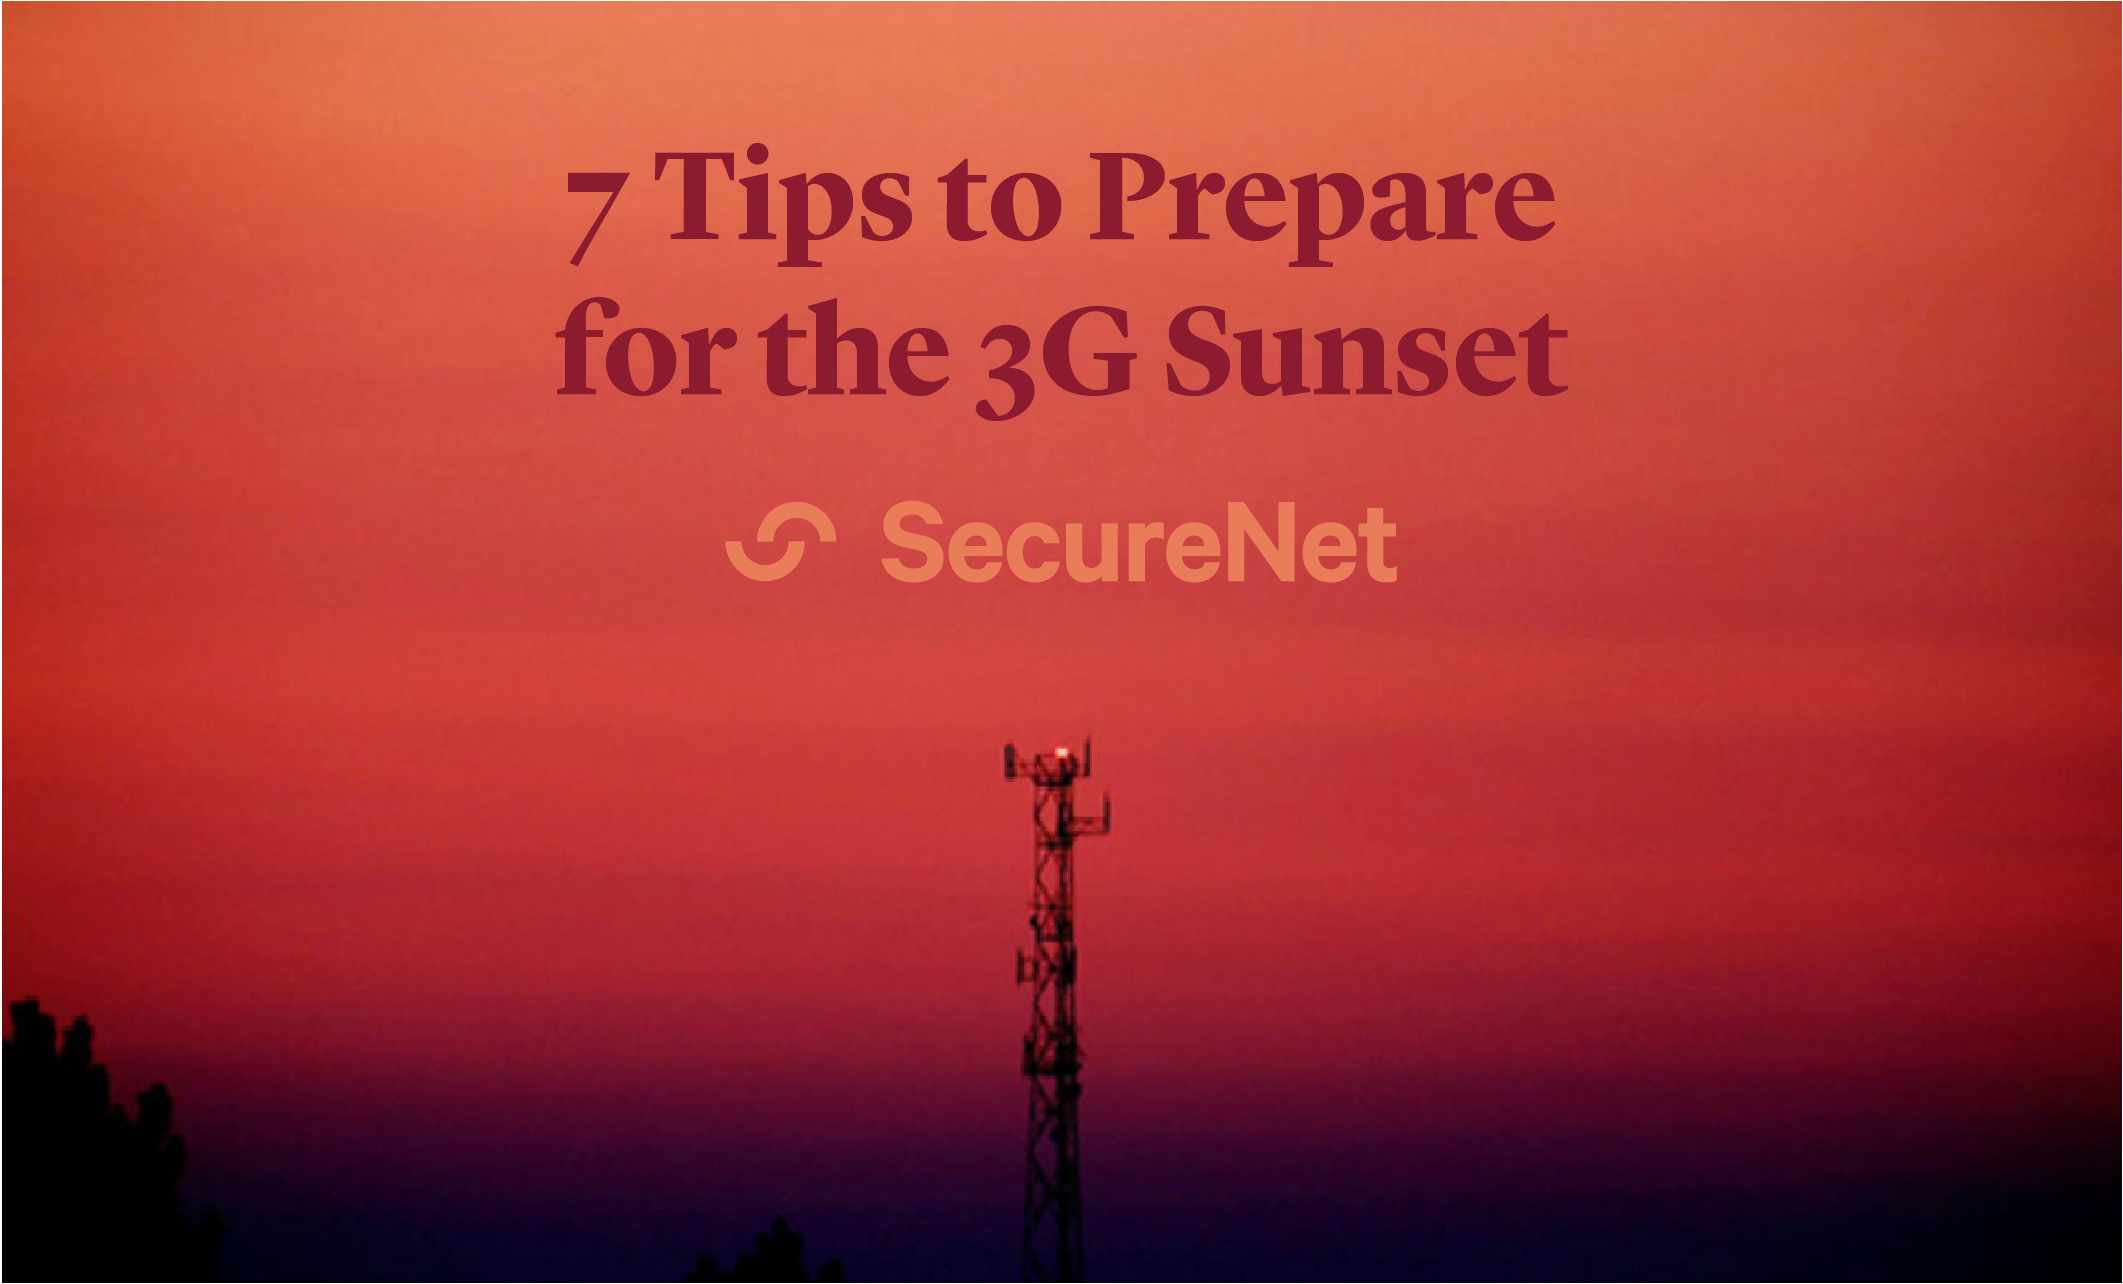 7 Tips to Prepare for the 3G Sunset